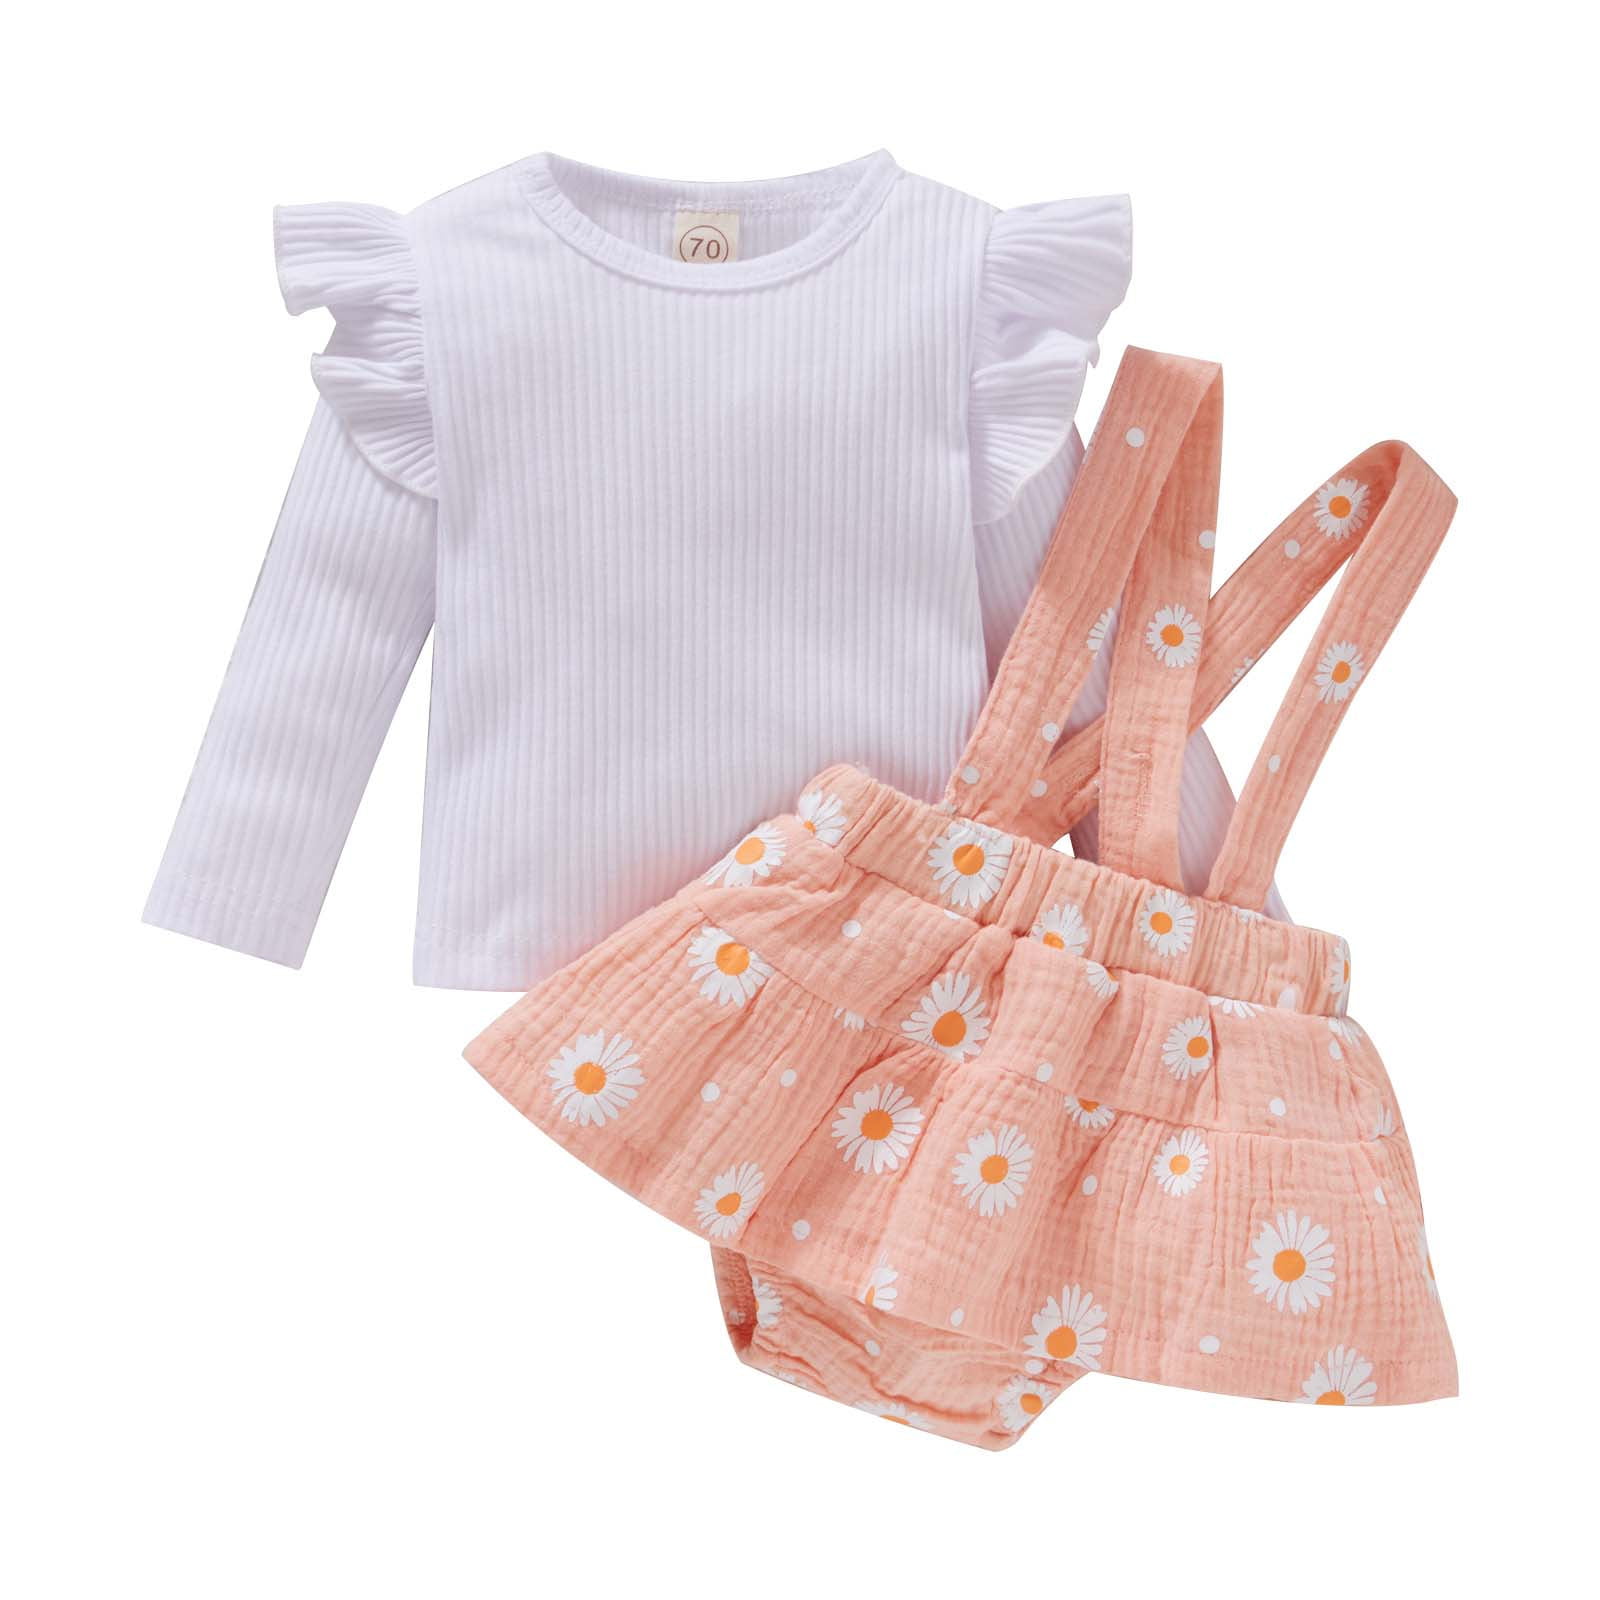 Cethrio Clothes Sets for Girls Patterd Skirt Long Sleeve Comfort Pink  Outfits Set Size 3-6 Months 